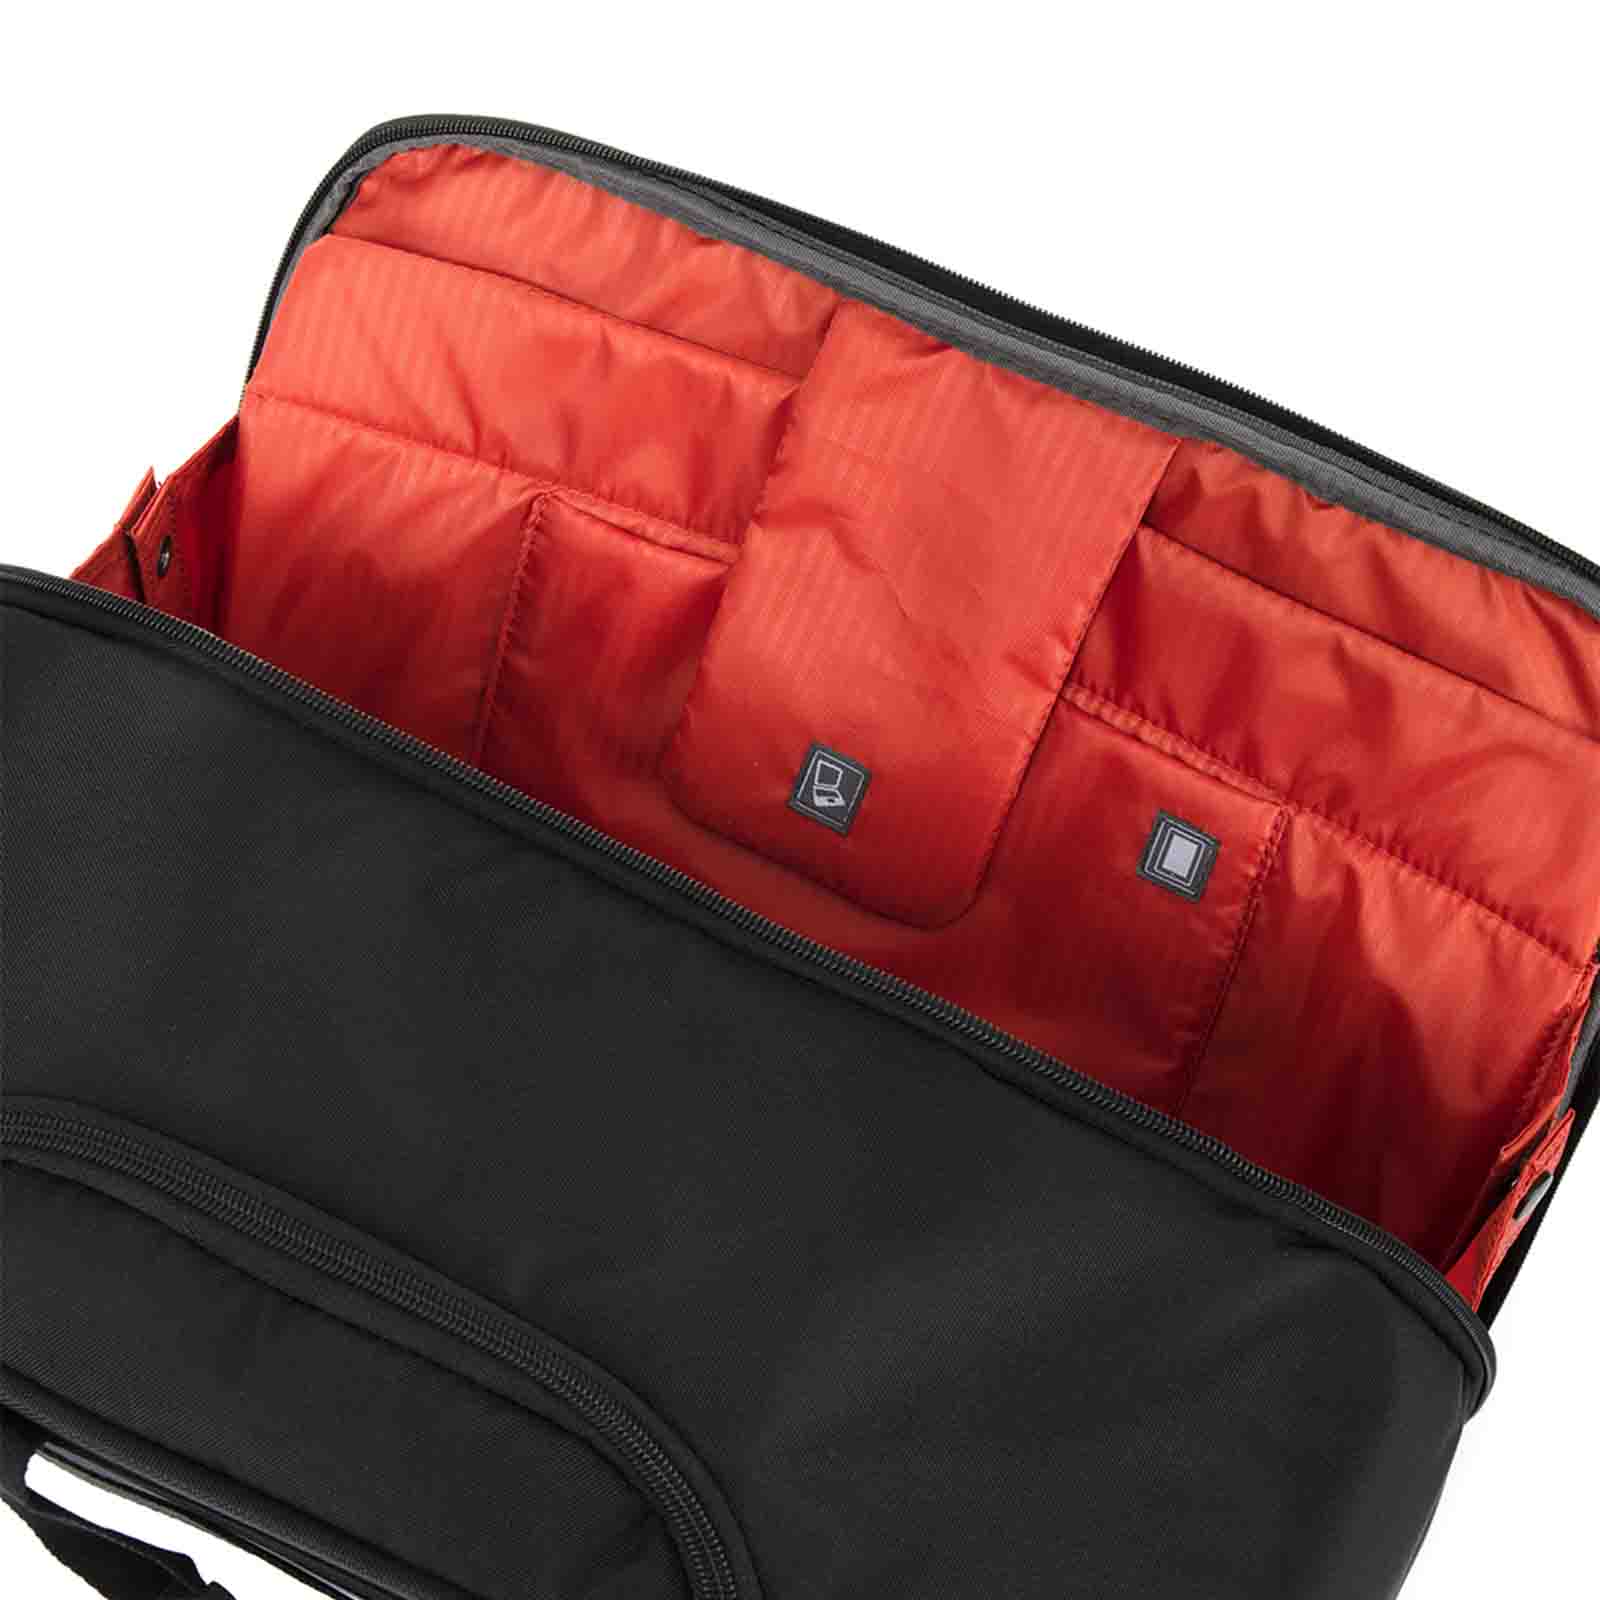 American-Tourister-Speedair-44cm-Rolling-Tote-Black-Laptop-Pouch